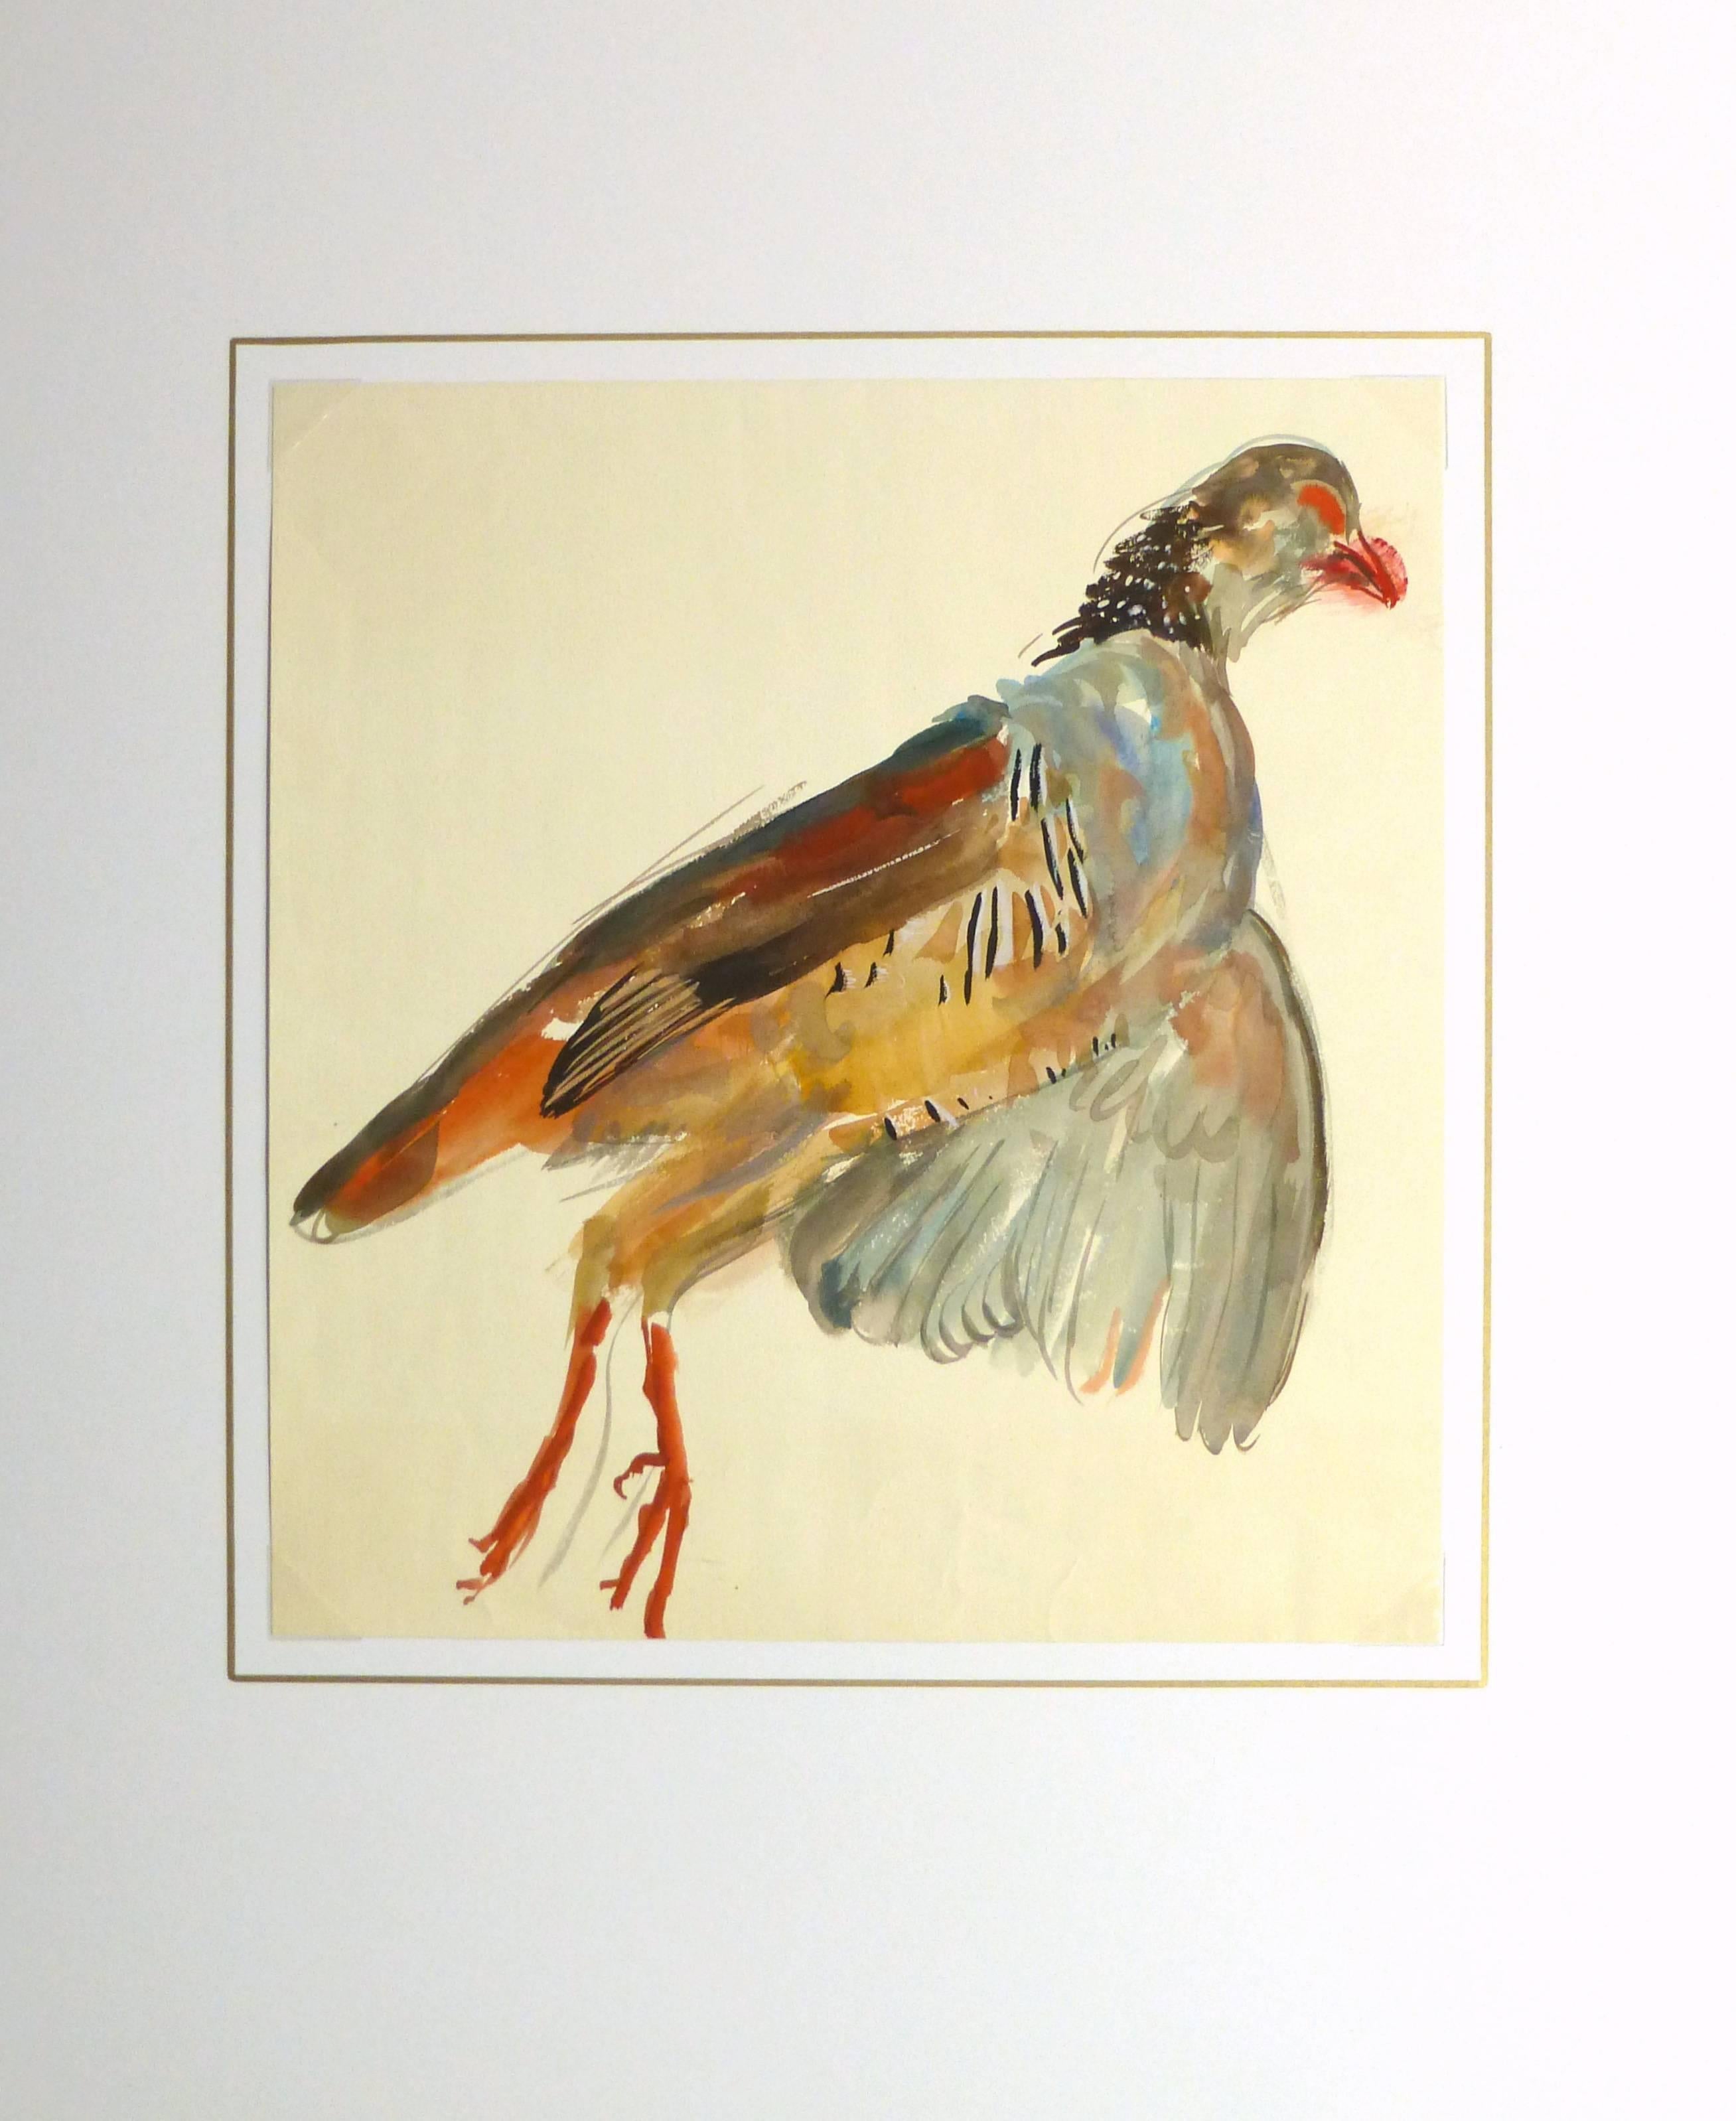 Beautifully-colored vintage French gouache painting of a game bird, circa 1950. 

Original artwork on paper displayed on a white mat with a gold border. Mat fits a standard-size frame. Archival plastic sleeve and Certificate of Authenticity